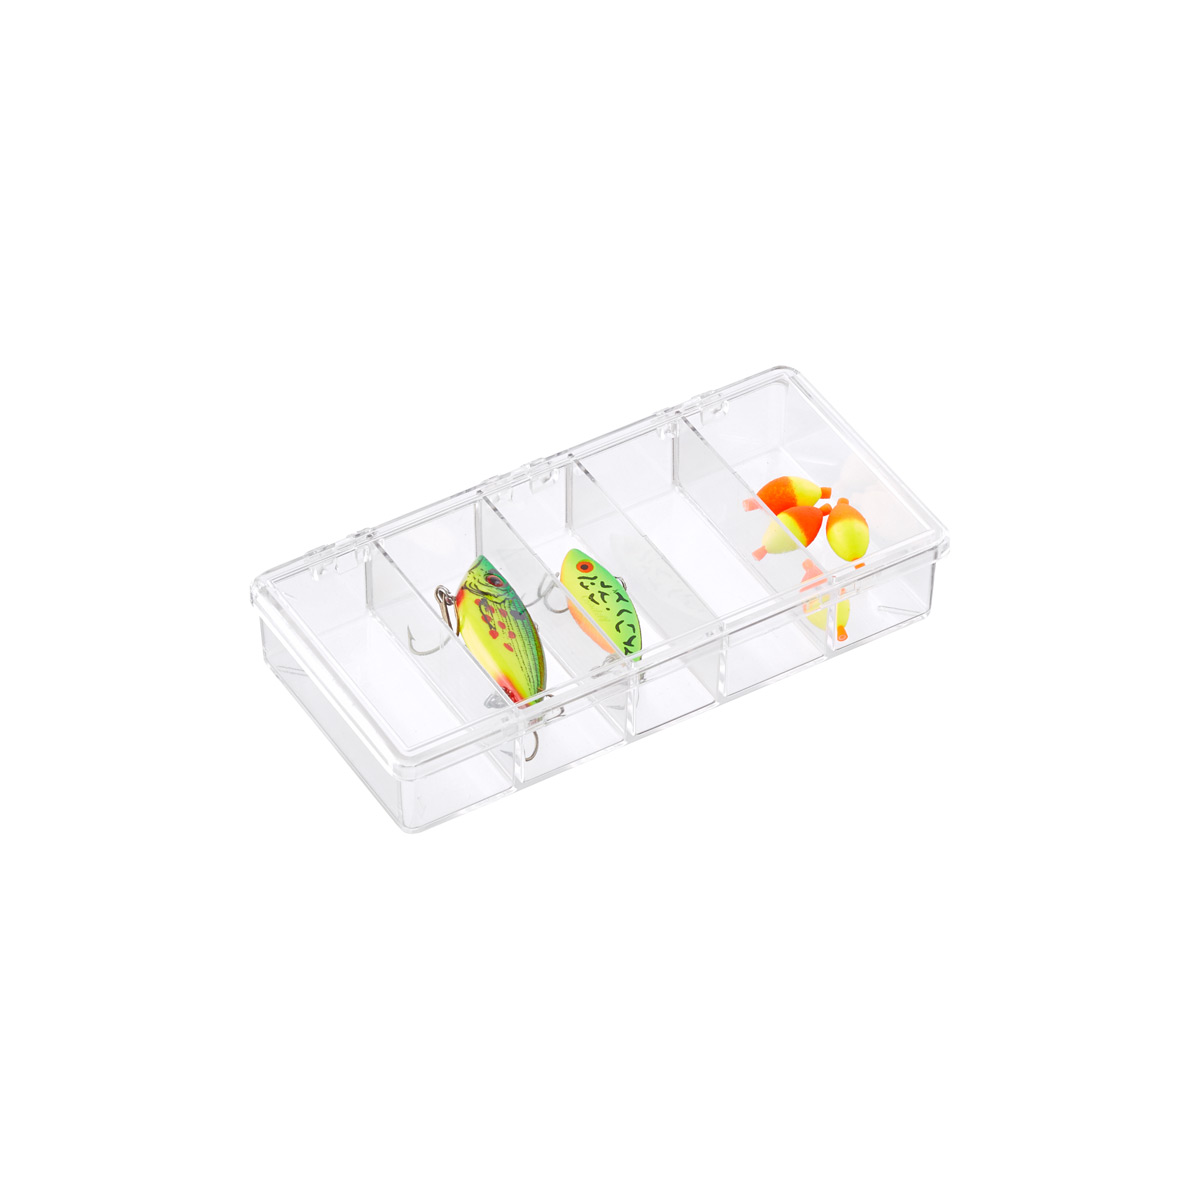 https://www.containerstore.com/catalogimages/288370/312140_5CompartmentBoxSm_1200.jpg